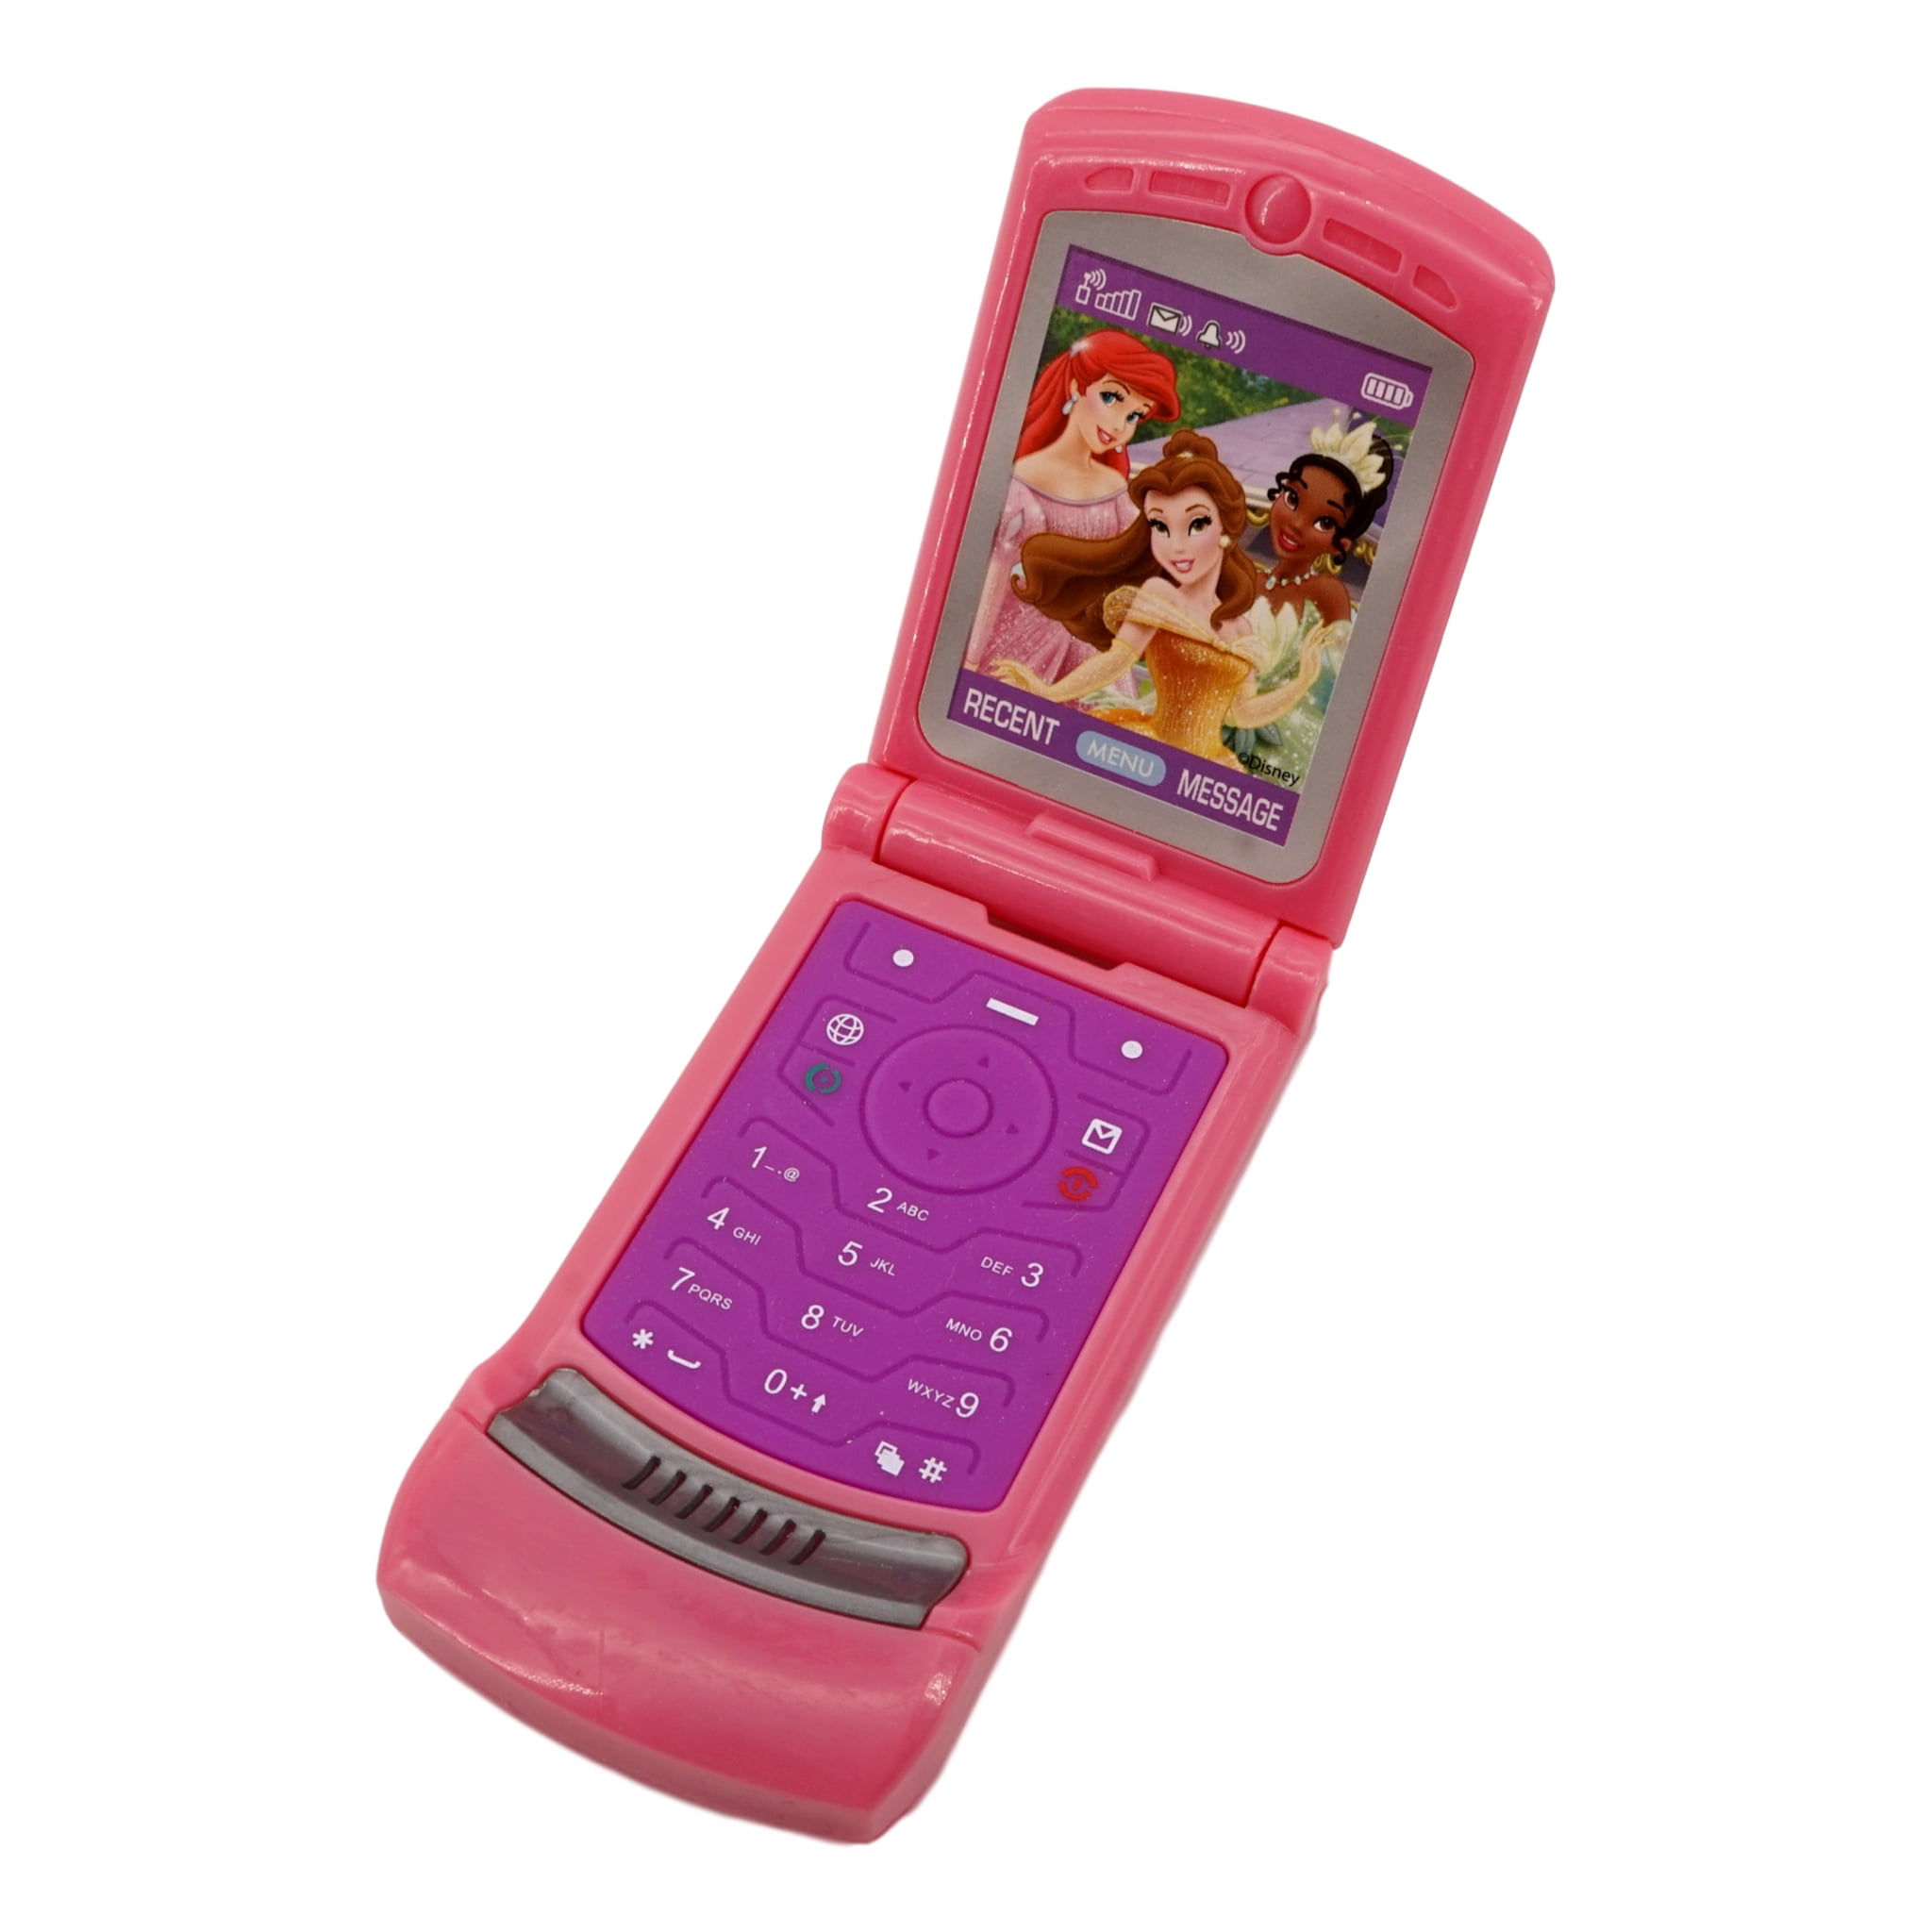 Toy Flip Phone Princess, Pink Toy Toddler Pink Pretend Play Dialing Sounds 